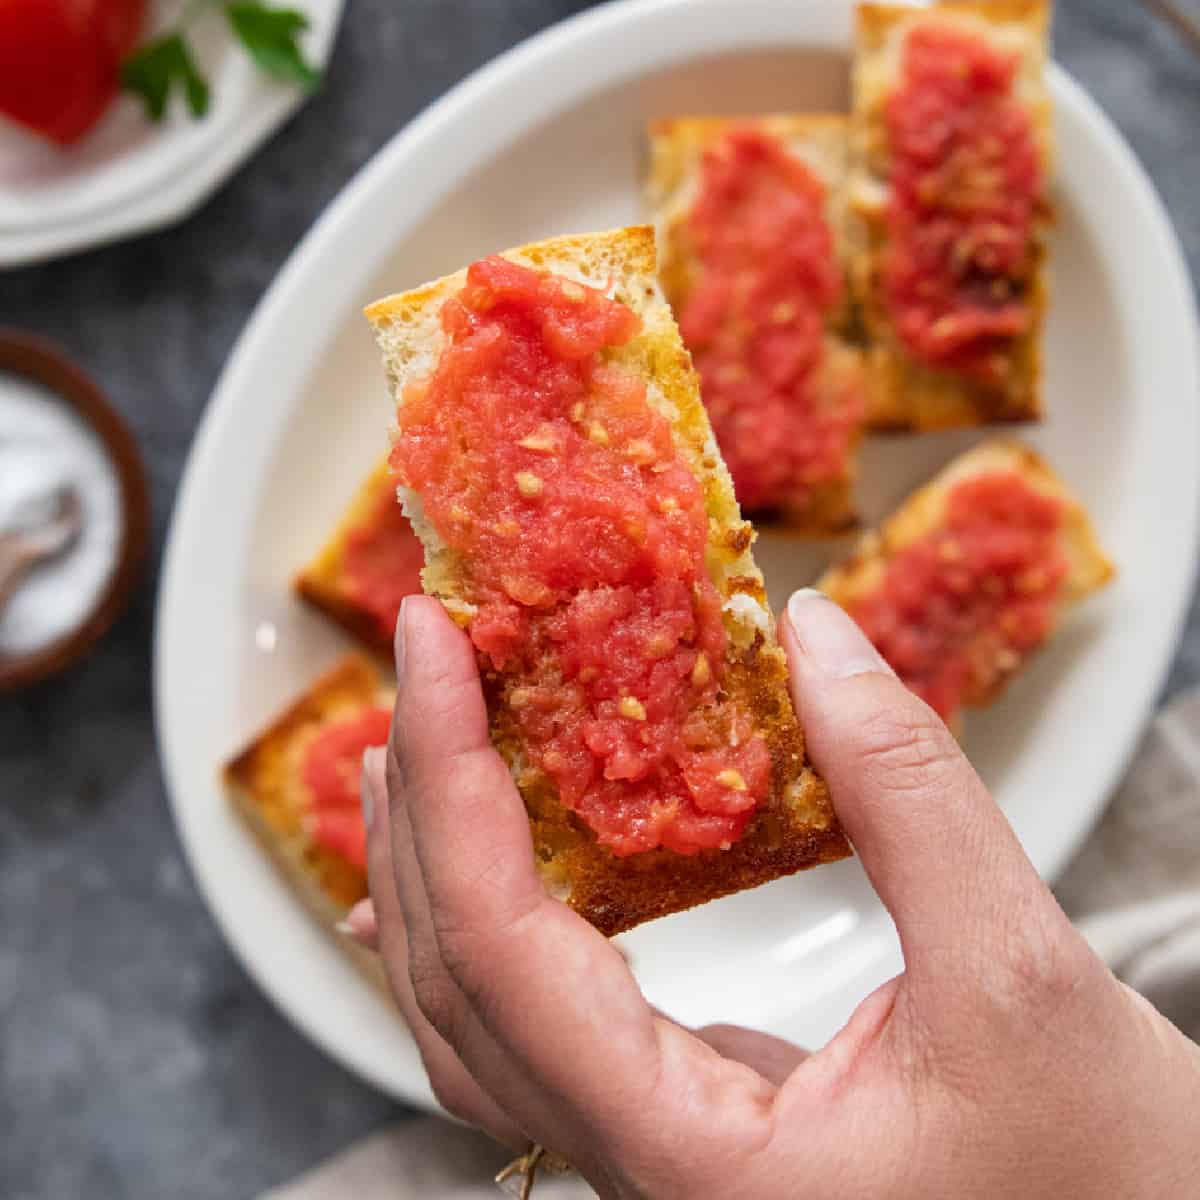 Pan con tomate is a Spanish tomato bread from Catalonia. It calls for 4 ingredients and is ready in 15 minutes. Crusty bread and fresh tomatoes make this Spanish tapa very delicious.
